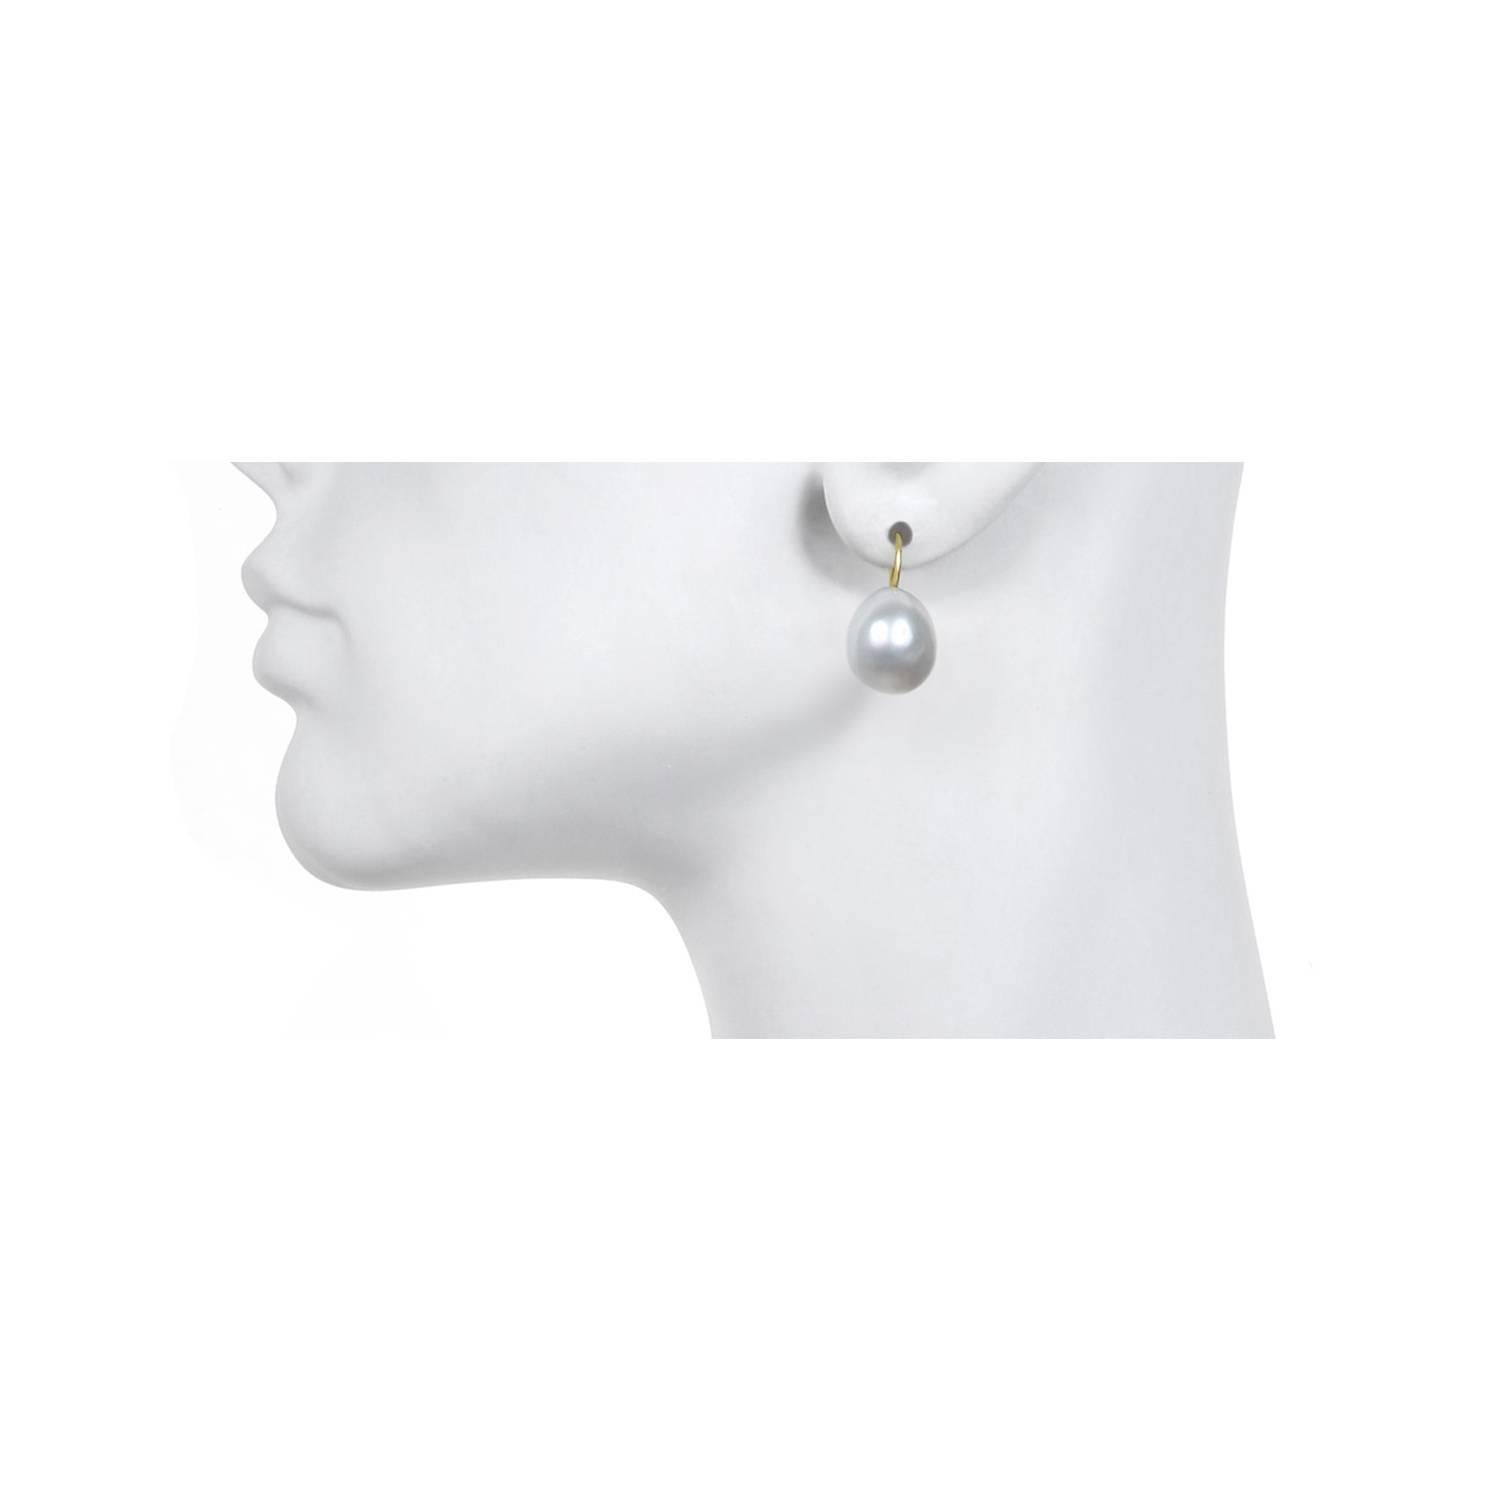 Classic, timeless and simply chic - baroque pearl drops are finished with 18k gold ear wires.  
Each pair of pearl earrings will vary slightly in shape and color due to their organic nature.

Color: White bodycolor with rose overtones
Skin: Very